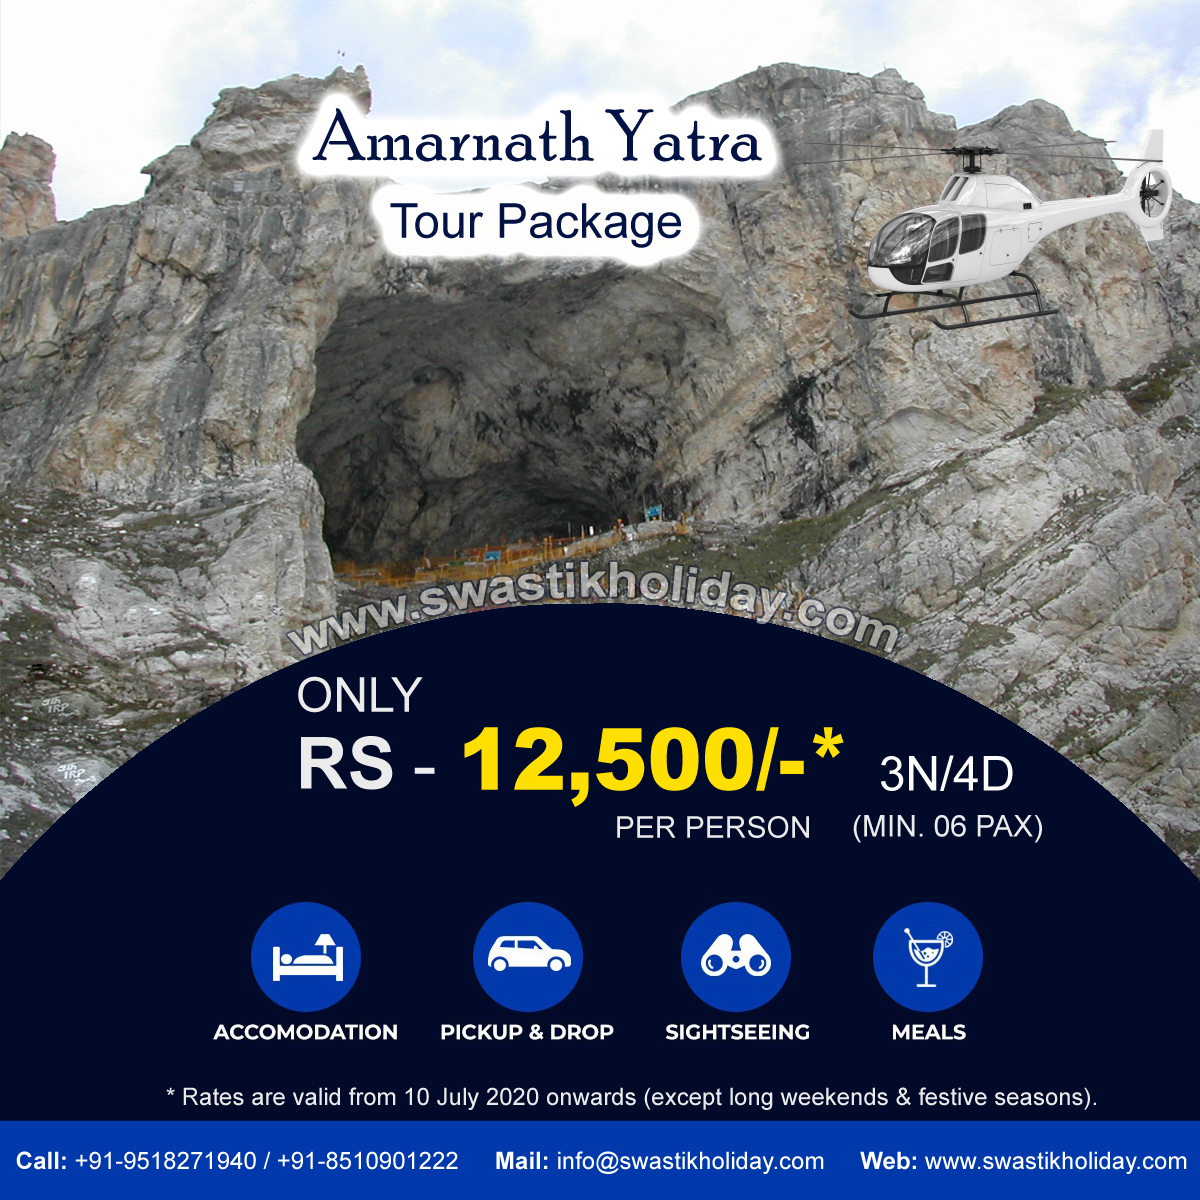 #Amarnath one of the holiest shrines in Hinduism. 
Now Book 3 Nights #amarnathYatra #package by #helicopter @ Just Rs. 12500/-*pp.
For details visit swastikholiday.com/shubhdarshan/a… 
or call/whatsapp on +91- 8510901222, 9213313000, 9518271940

#amarnathyatra2020 #Yatrabyhelicopter #cave